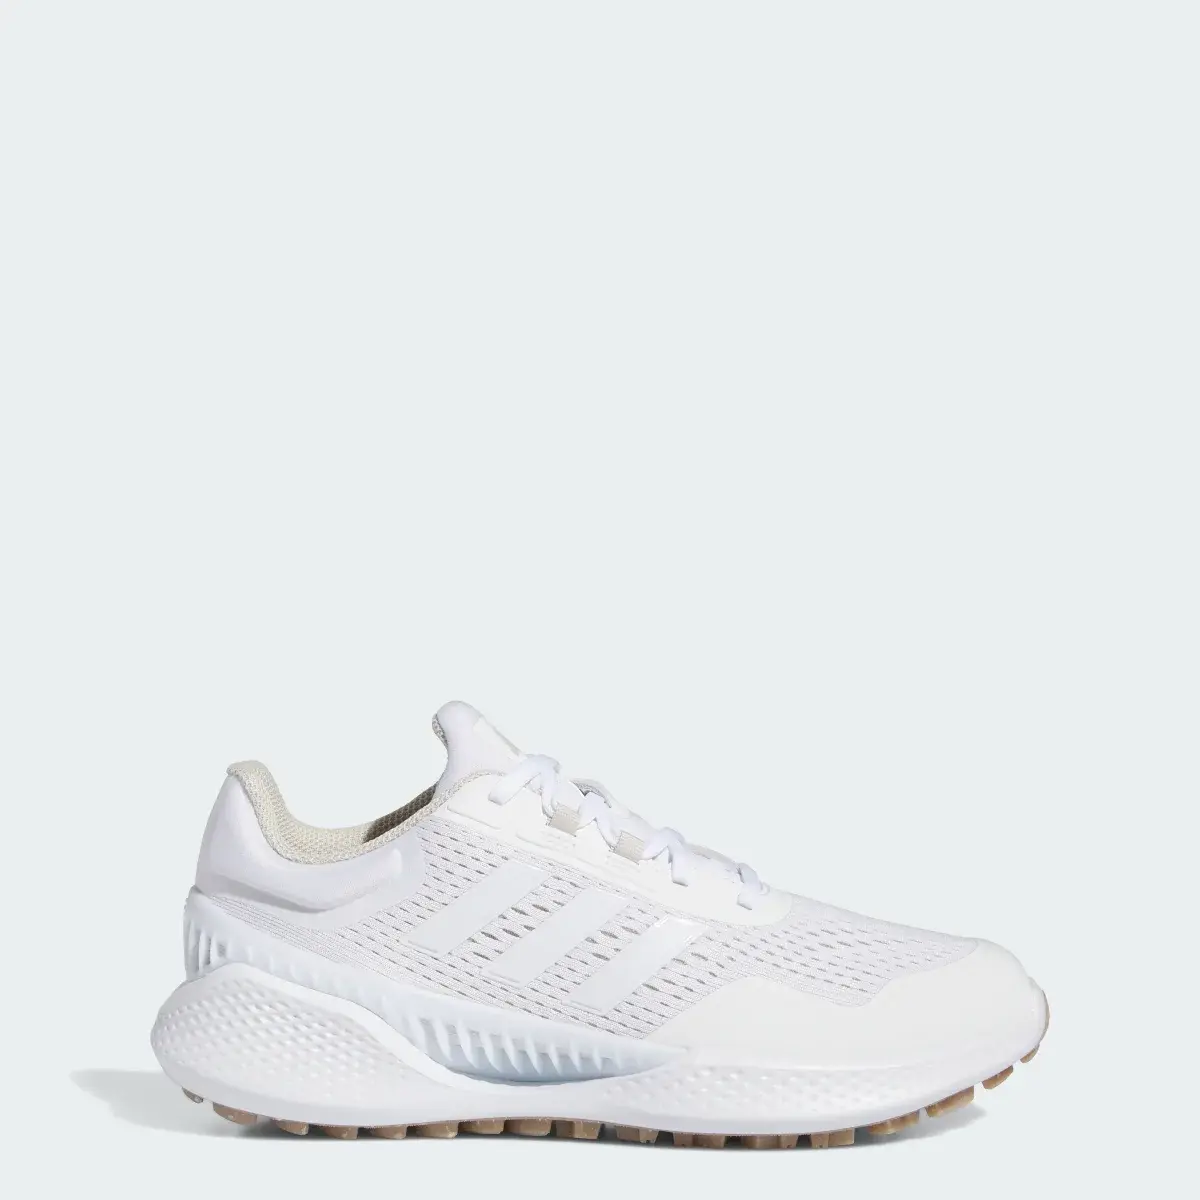 Adidas Summervent 24 Bounce Golf Shoes Low. 1